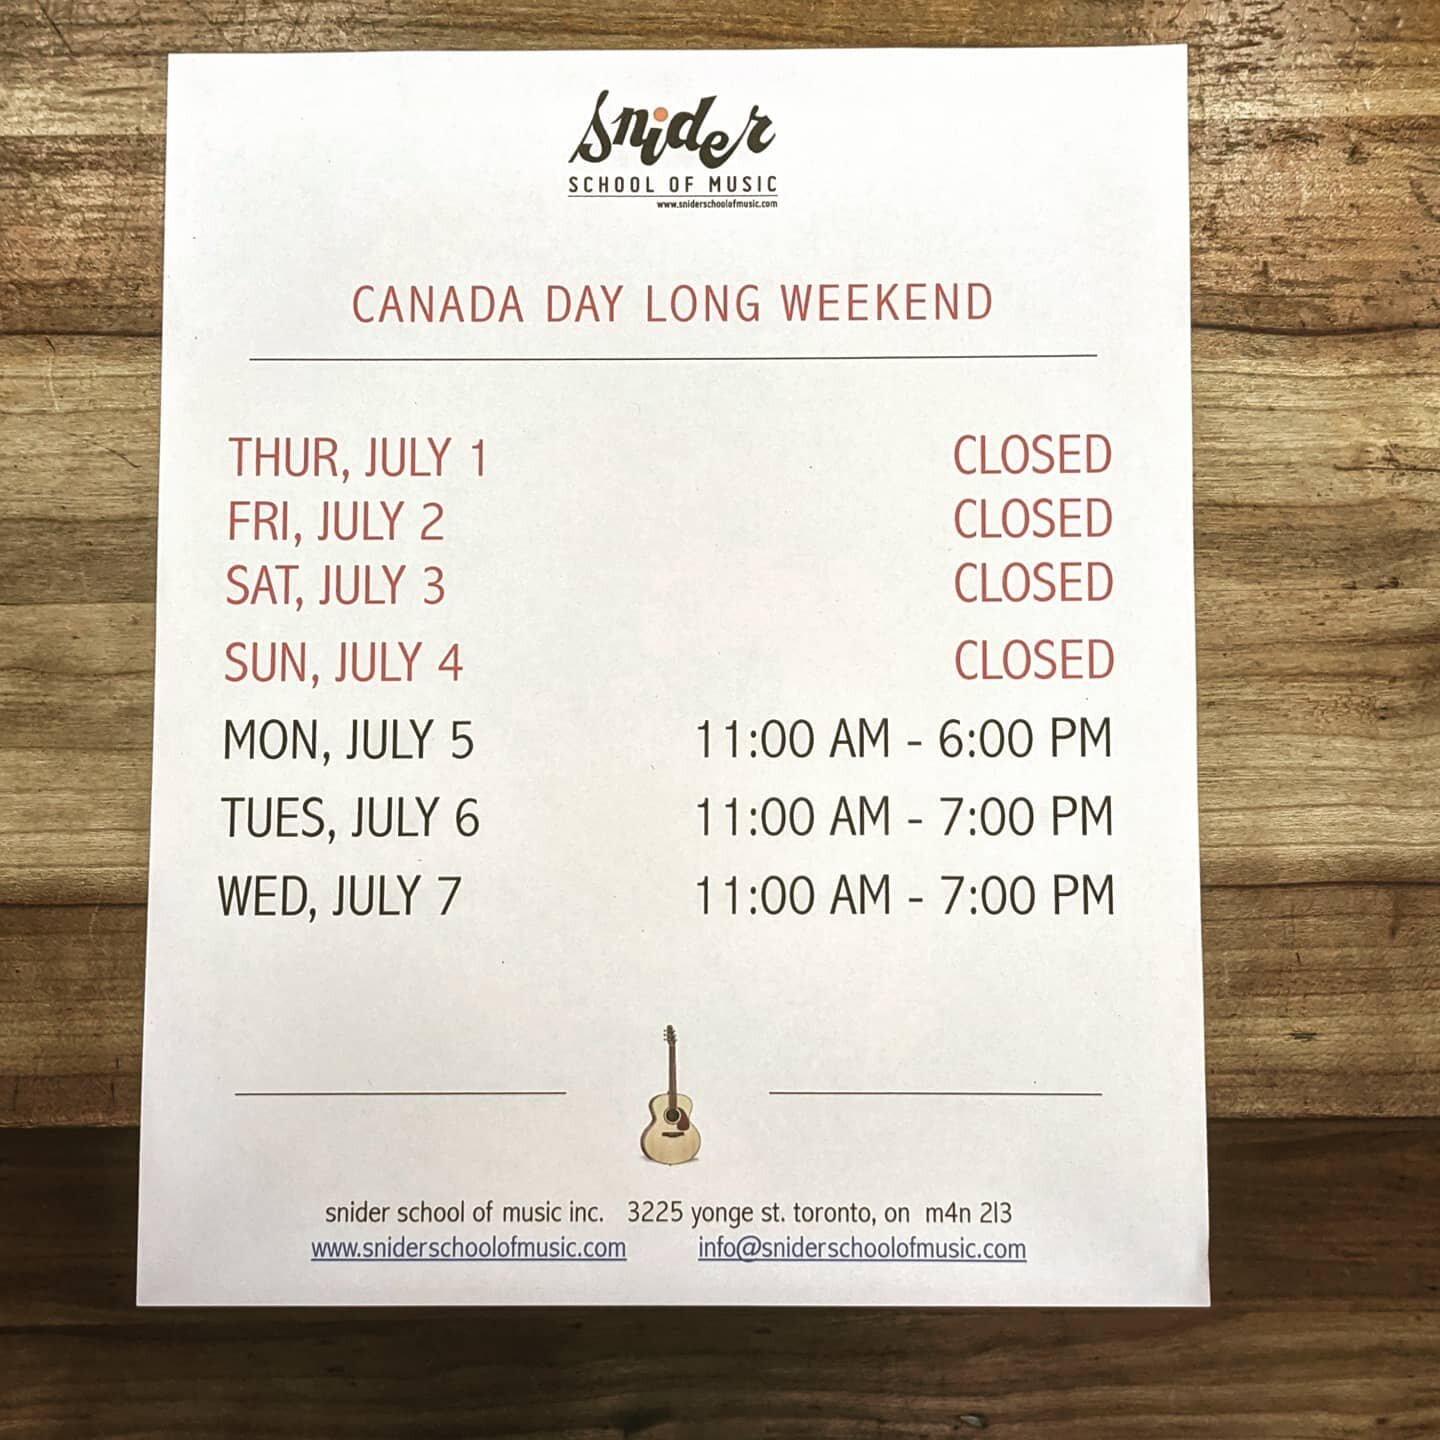 Canada Day long weekend hours